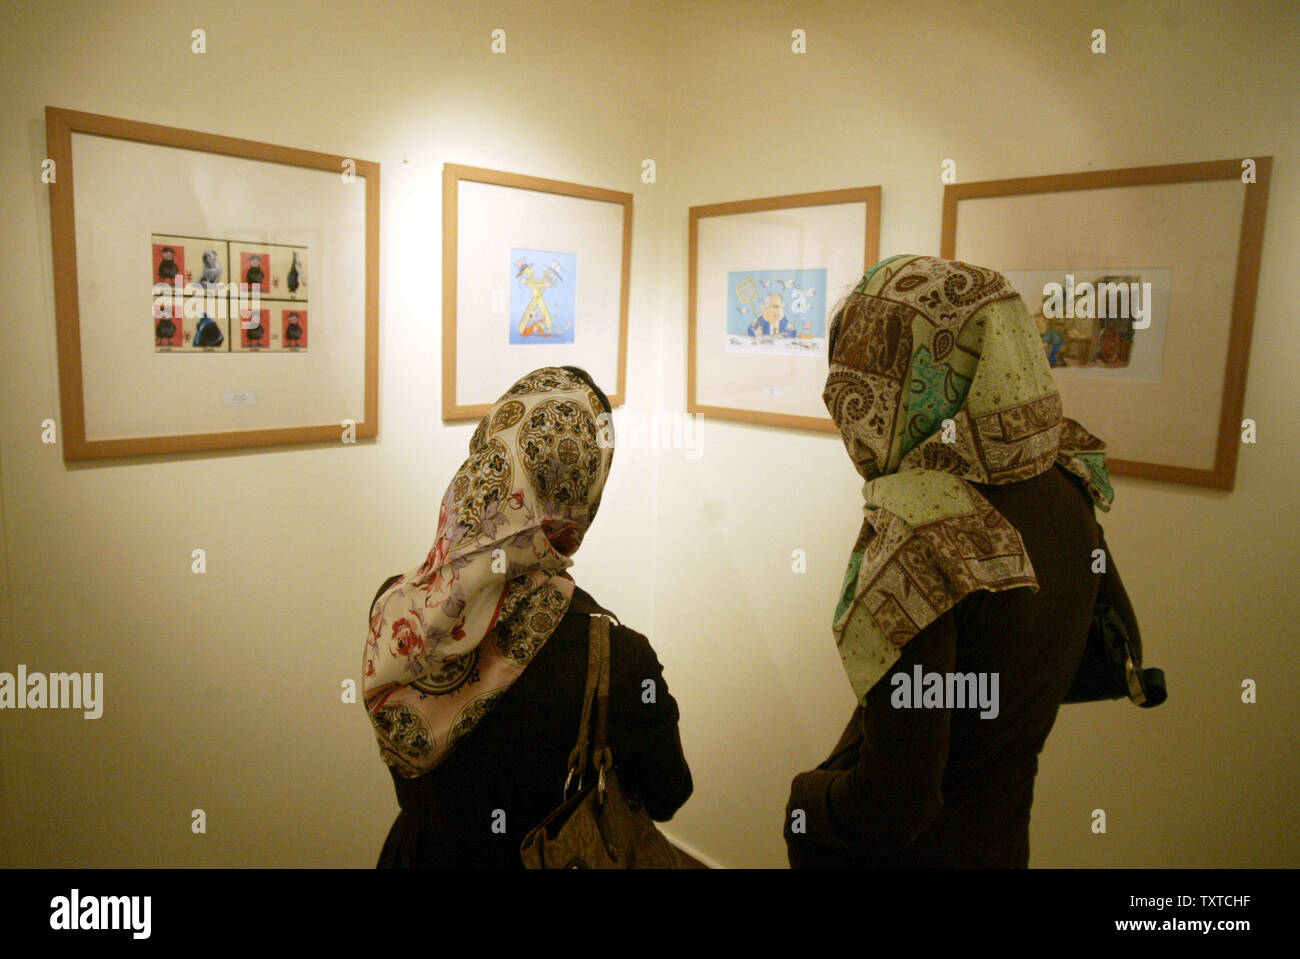 Two Iranian woman visit the Holocaust International Cartoon contest exhibition in Tehran, Iran on August 14, 2006. The contest is sponsored by Tehran's Hamshahri Newspaper and is aimed at testing how committed Europeans were to the concept freedom of expression. This contest comes months after a Danish paper published satirical cartoons of the Islamic Prophet Muhammad. (UPI Photo/Mohammad Kheirkhah) Stock Photo